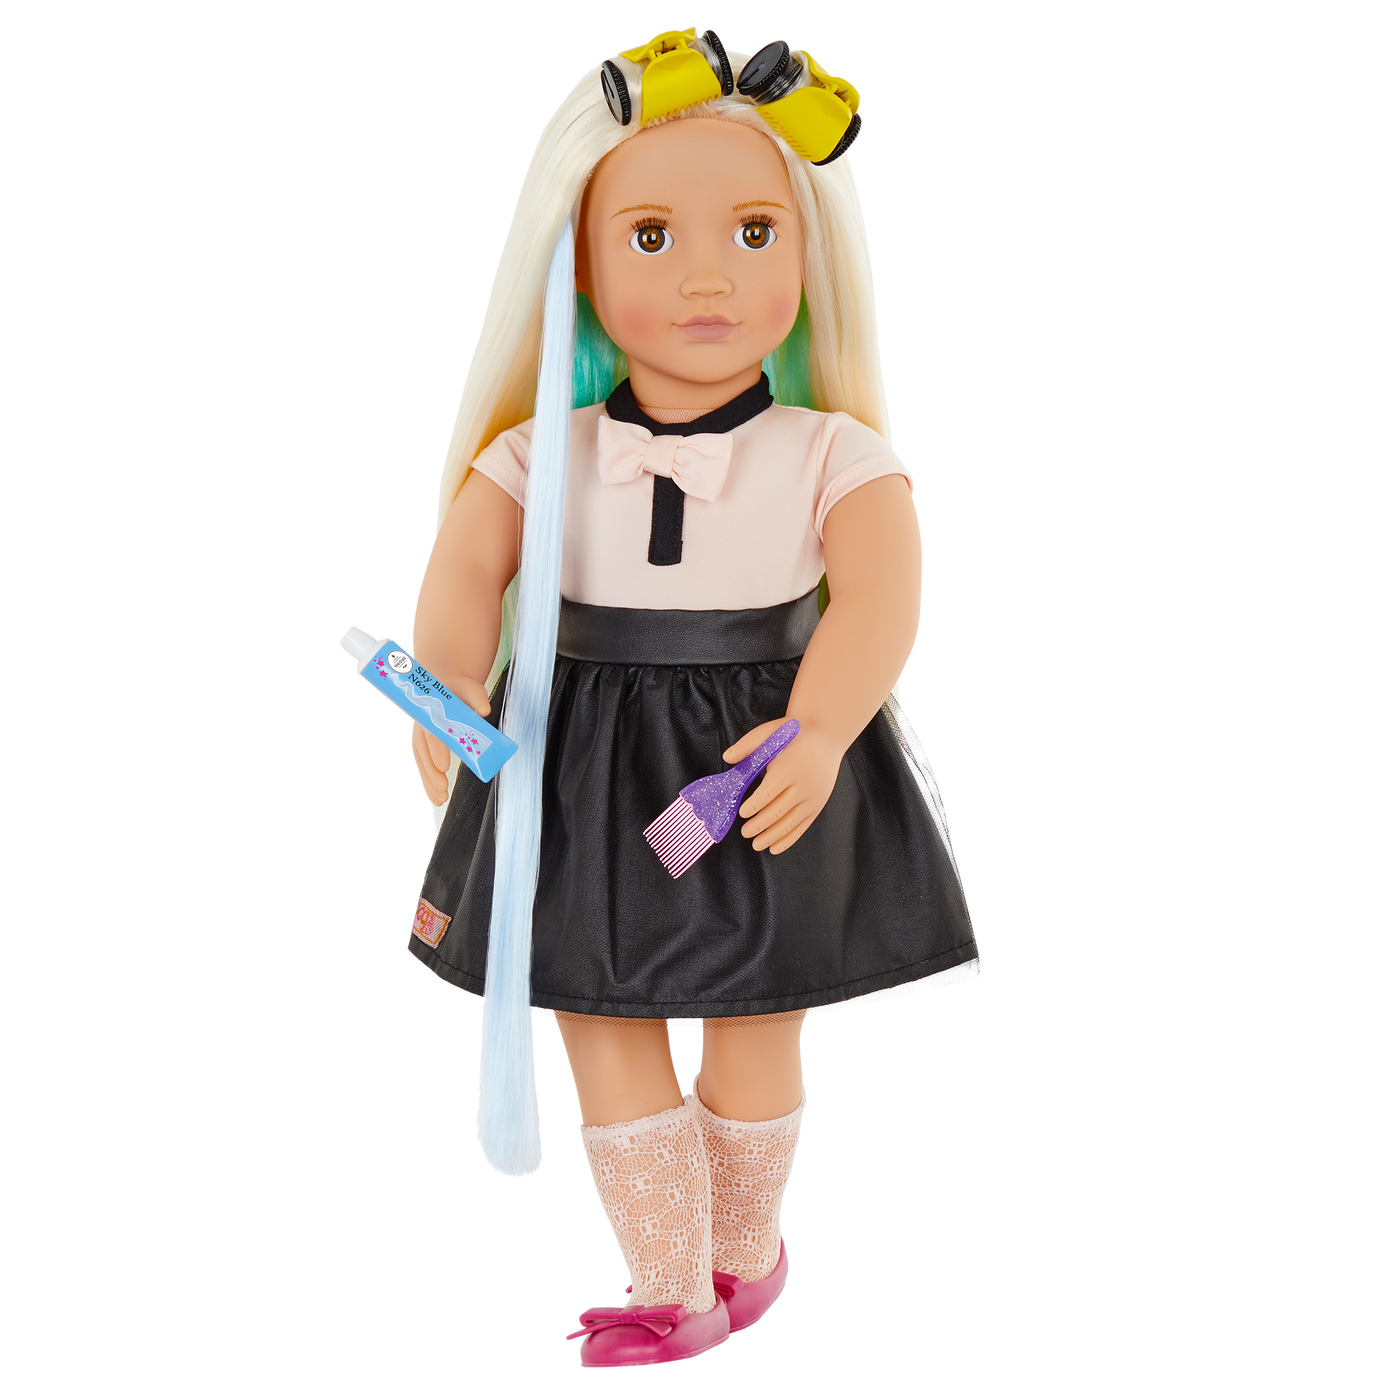 Our Generation Highlight My Day Hair Salon Set for 18-inch Dolls